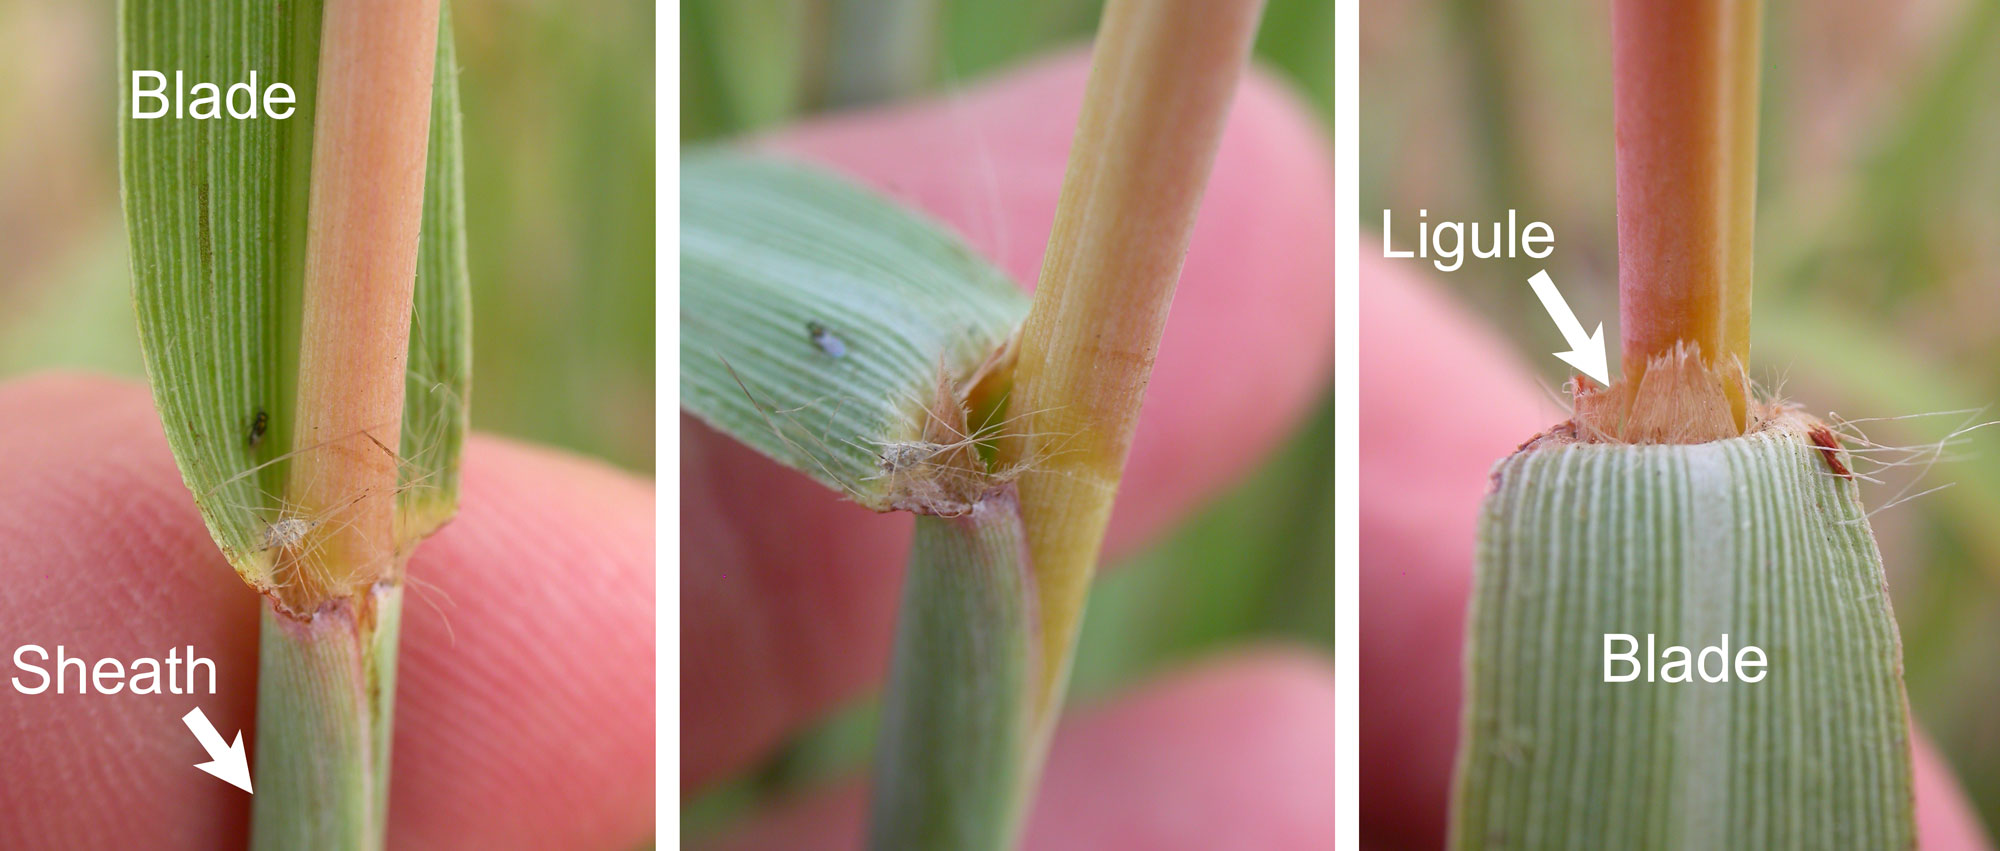 Photographs showing three views of the leaf blade, leaf sheath, and ligule of big bluestem. The junction between the blade and the sheath is shown in three views in the three left panels, including the membranaceous ligule.